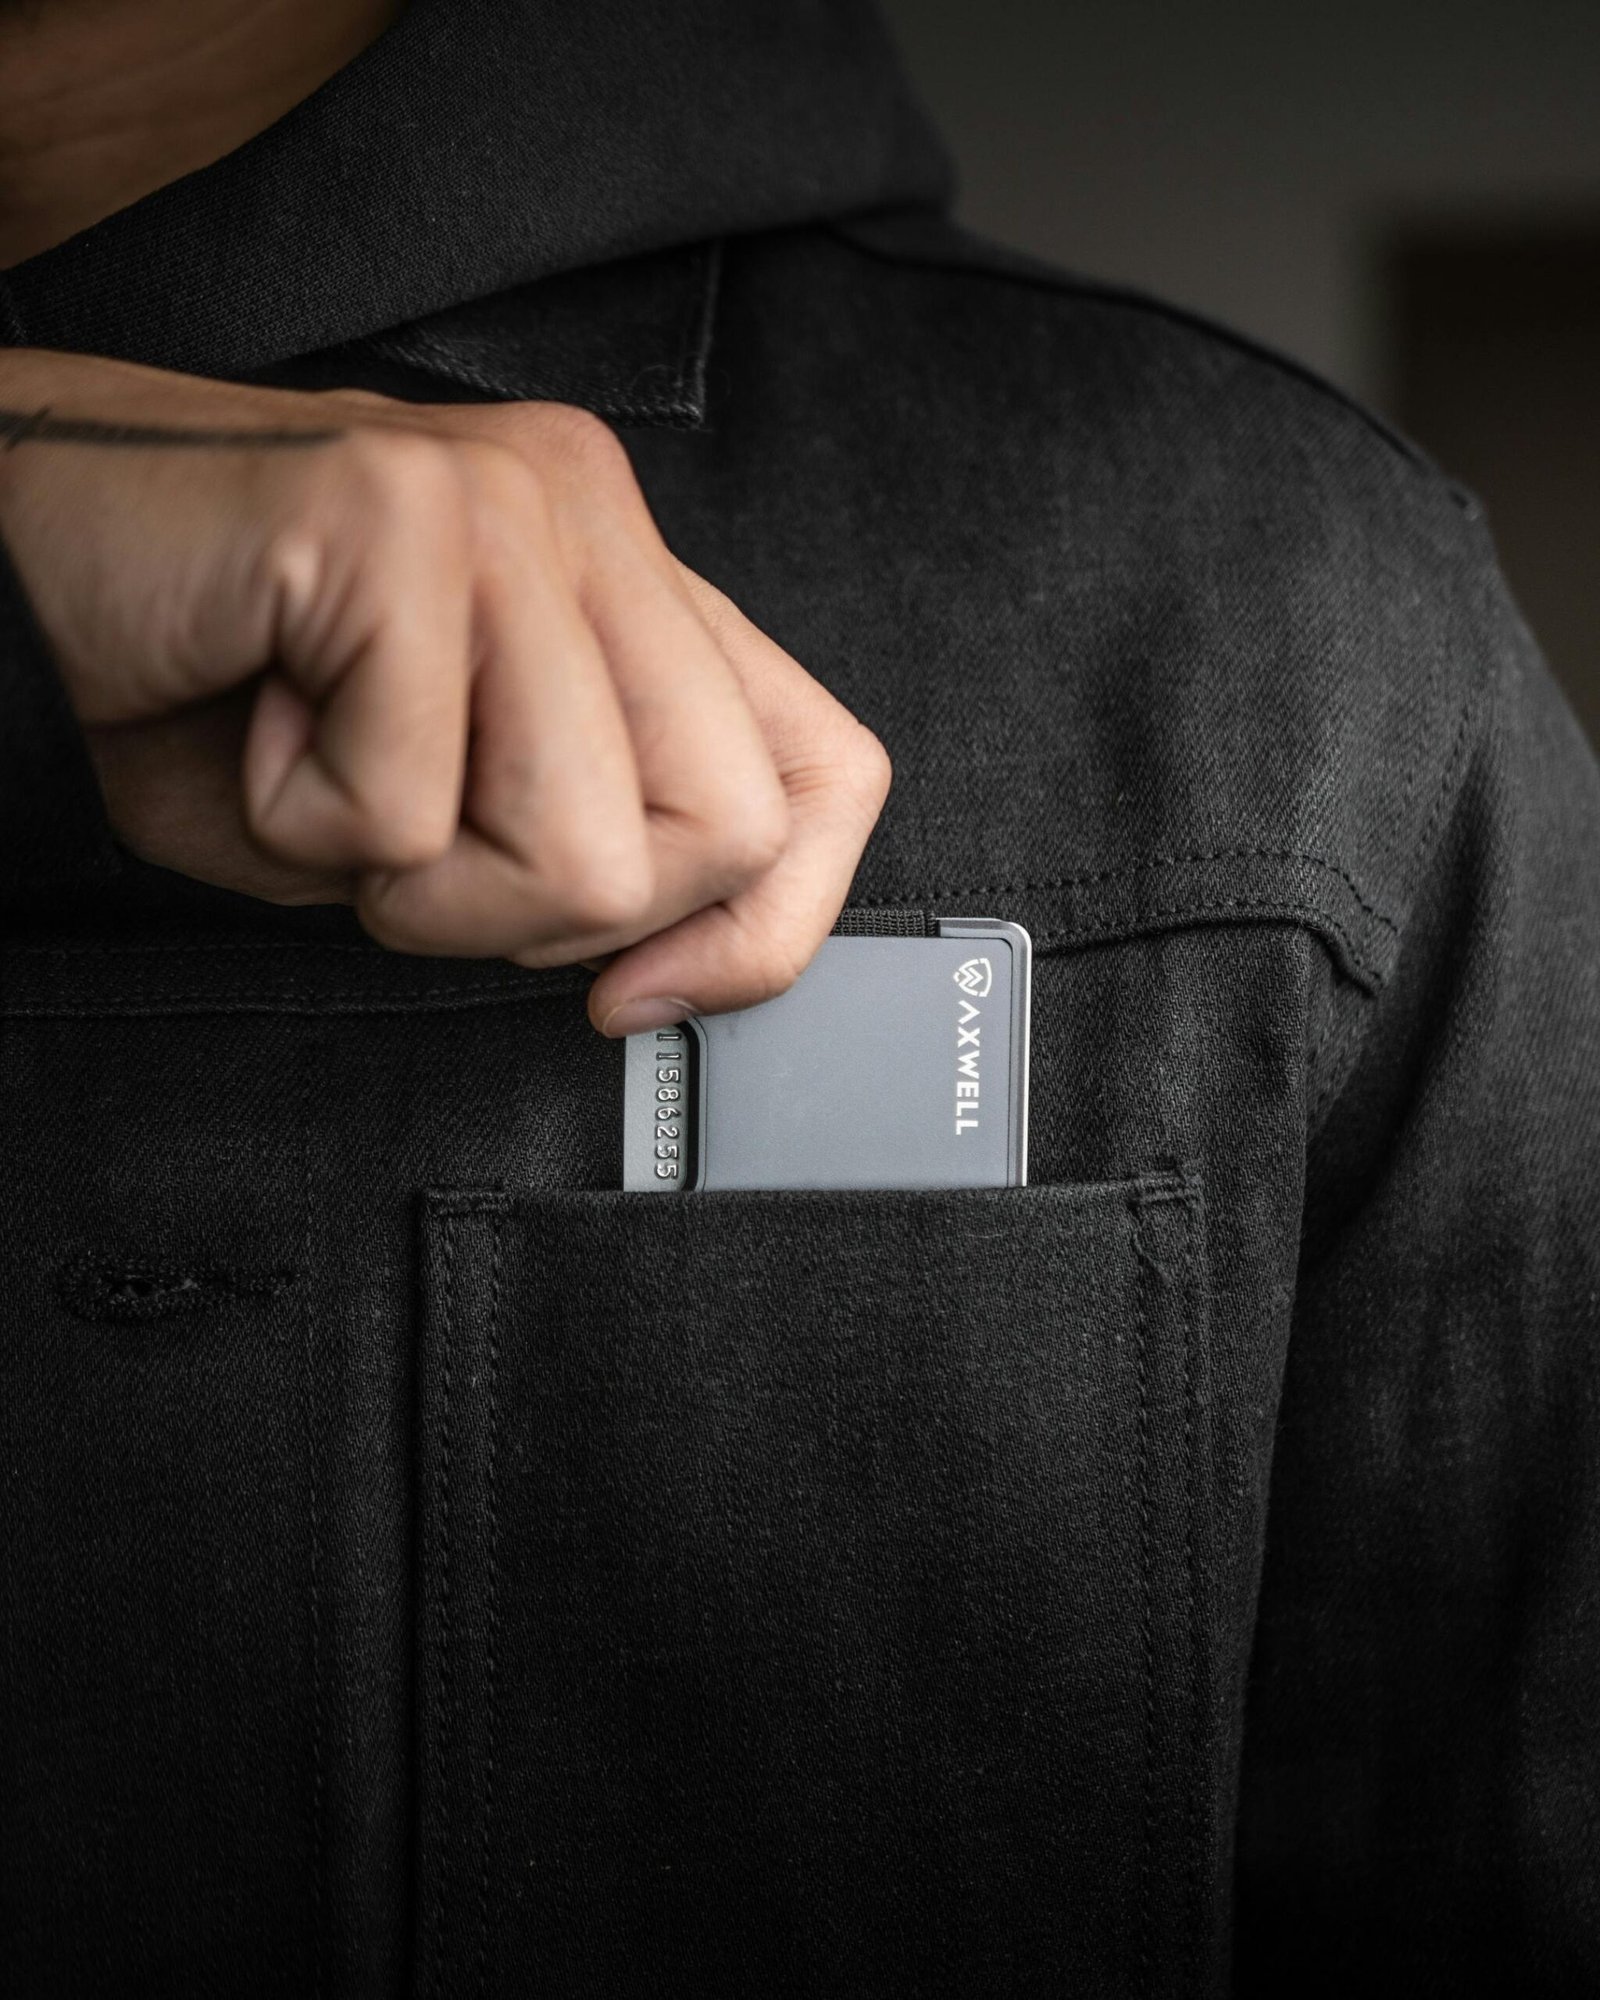 Efficiency meets Style: Compact Wallets for Minimalists